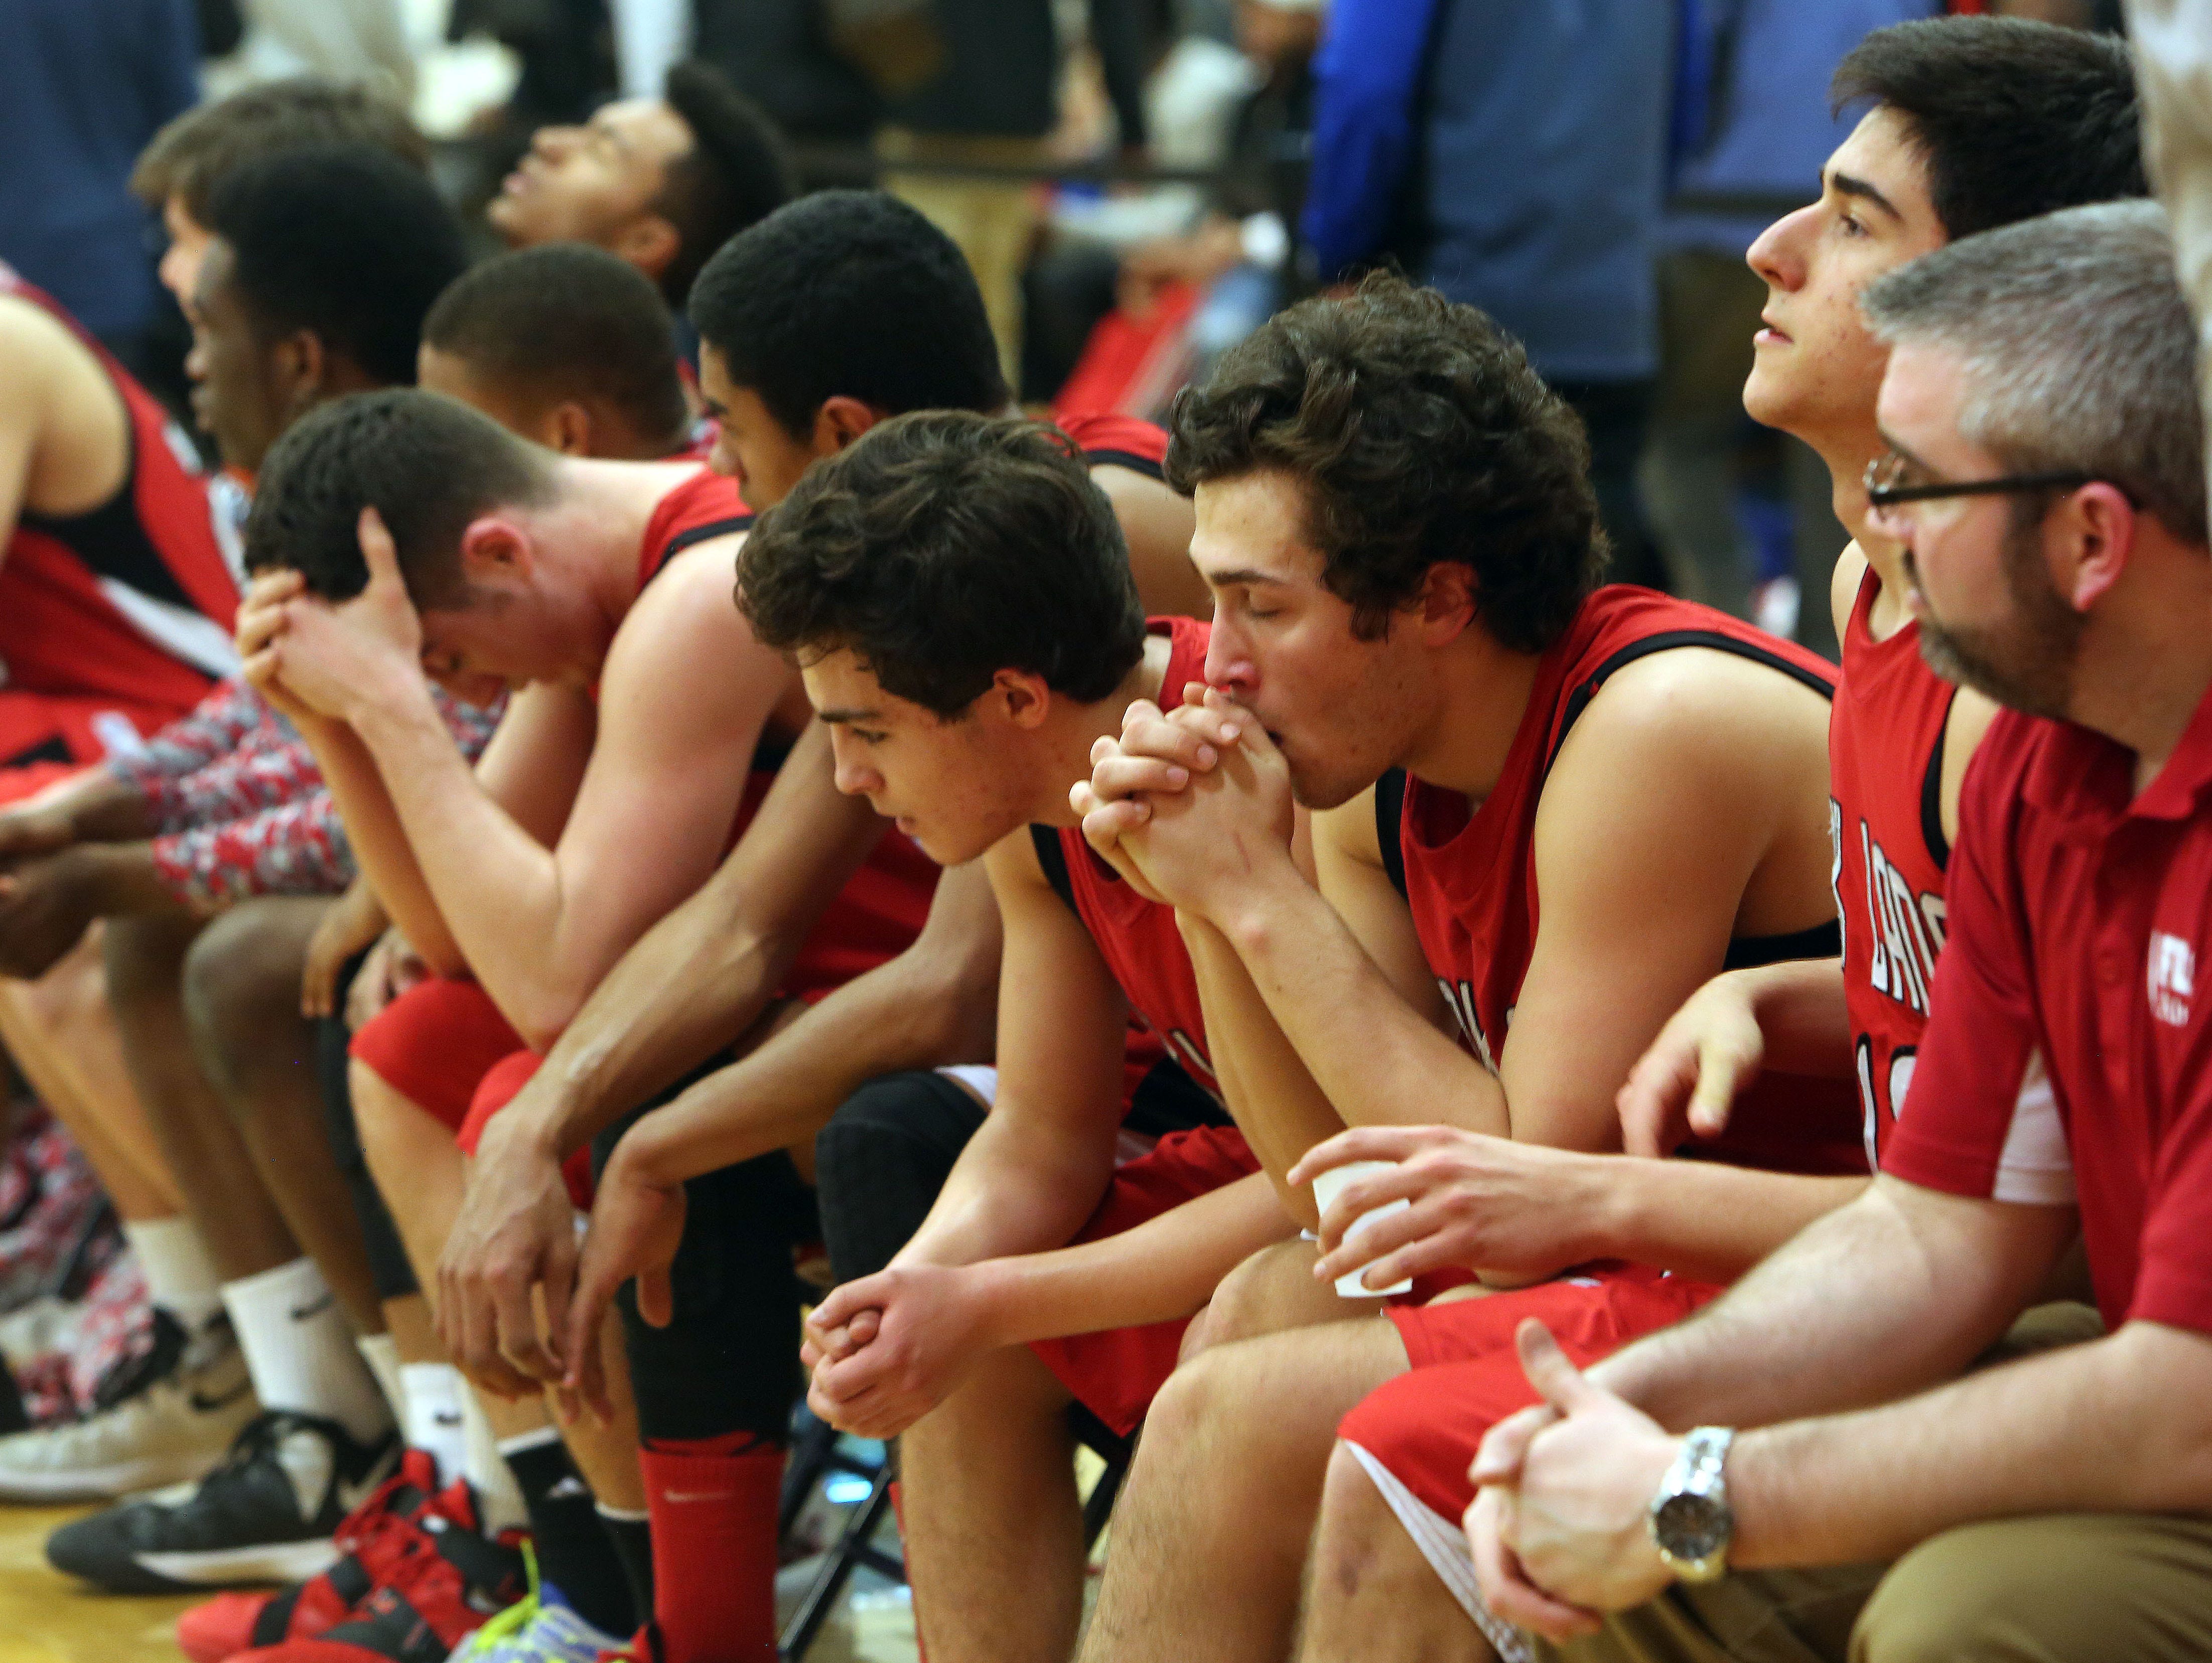 Fox Lane players watch from the bench as their season ends in a 62-44 loss to Middletown during the boys basketball Class AA regional finals at Orange Community College in Middletown March 4, 2016.